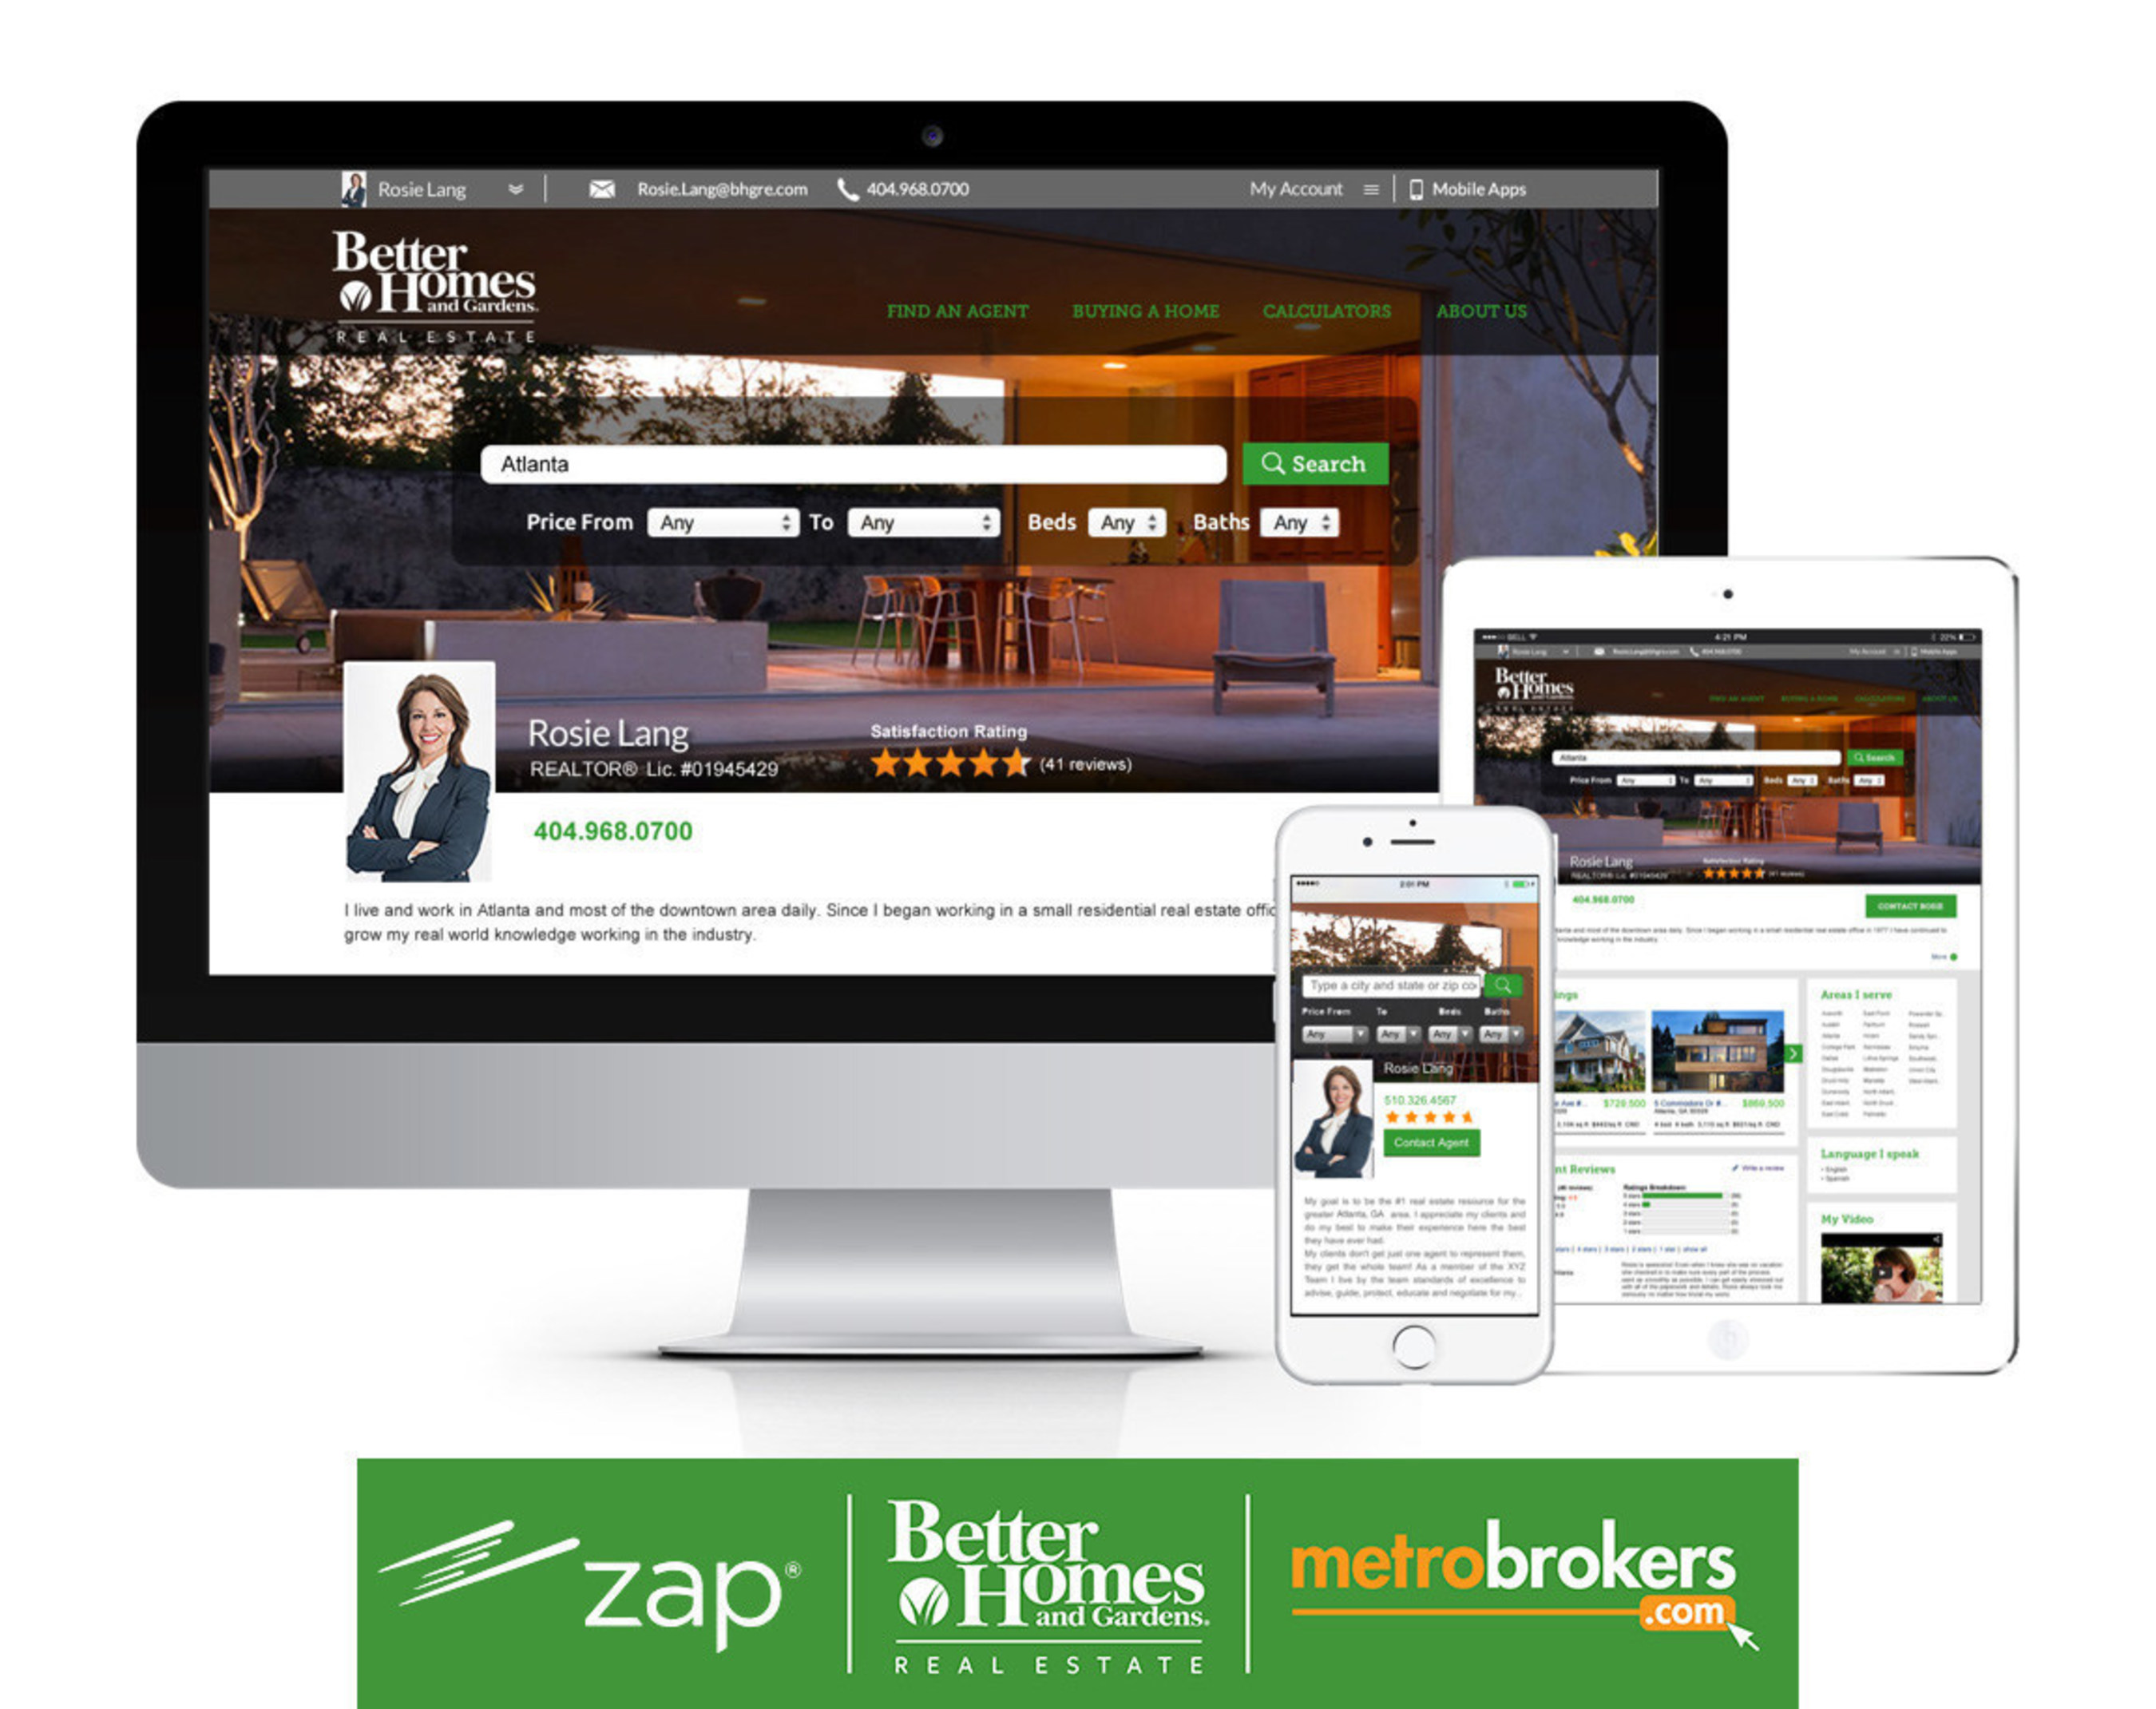 BHGRE Metro Brokers is in the process of rolling out the new ZAP technology to their 2,000 agents in metro Atlanta and north Georgia.